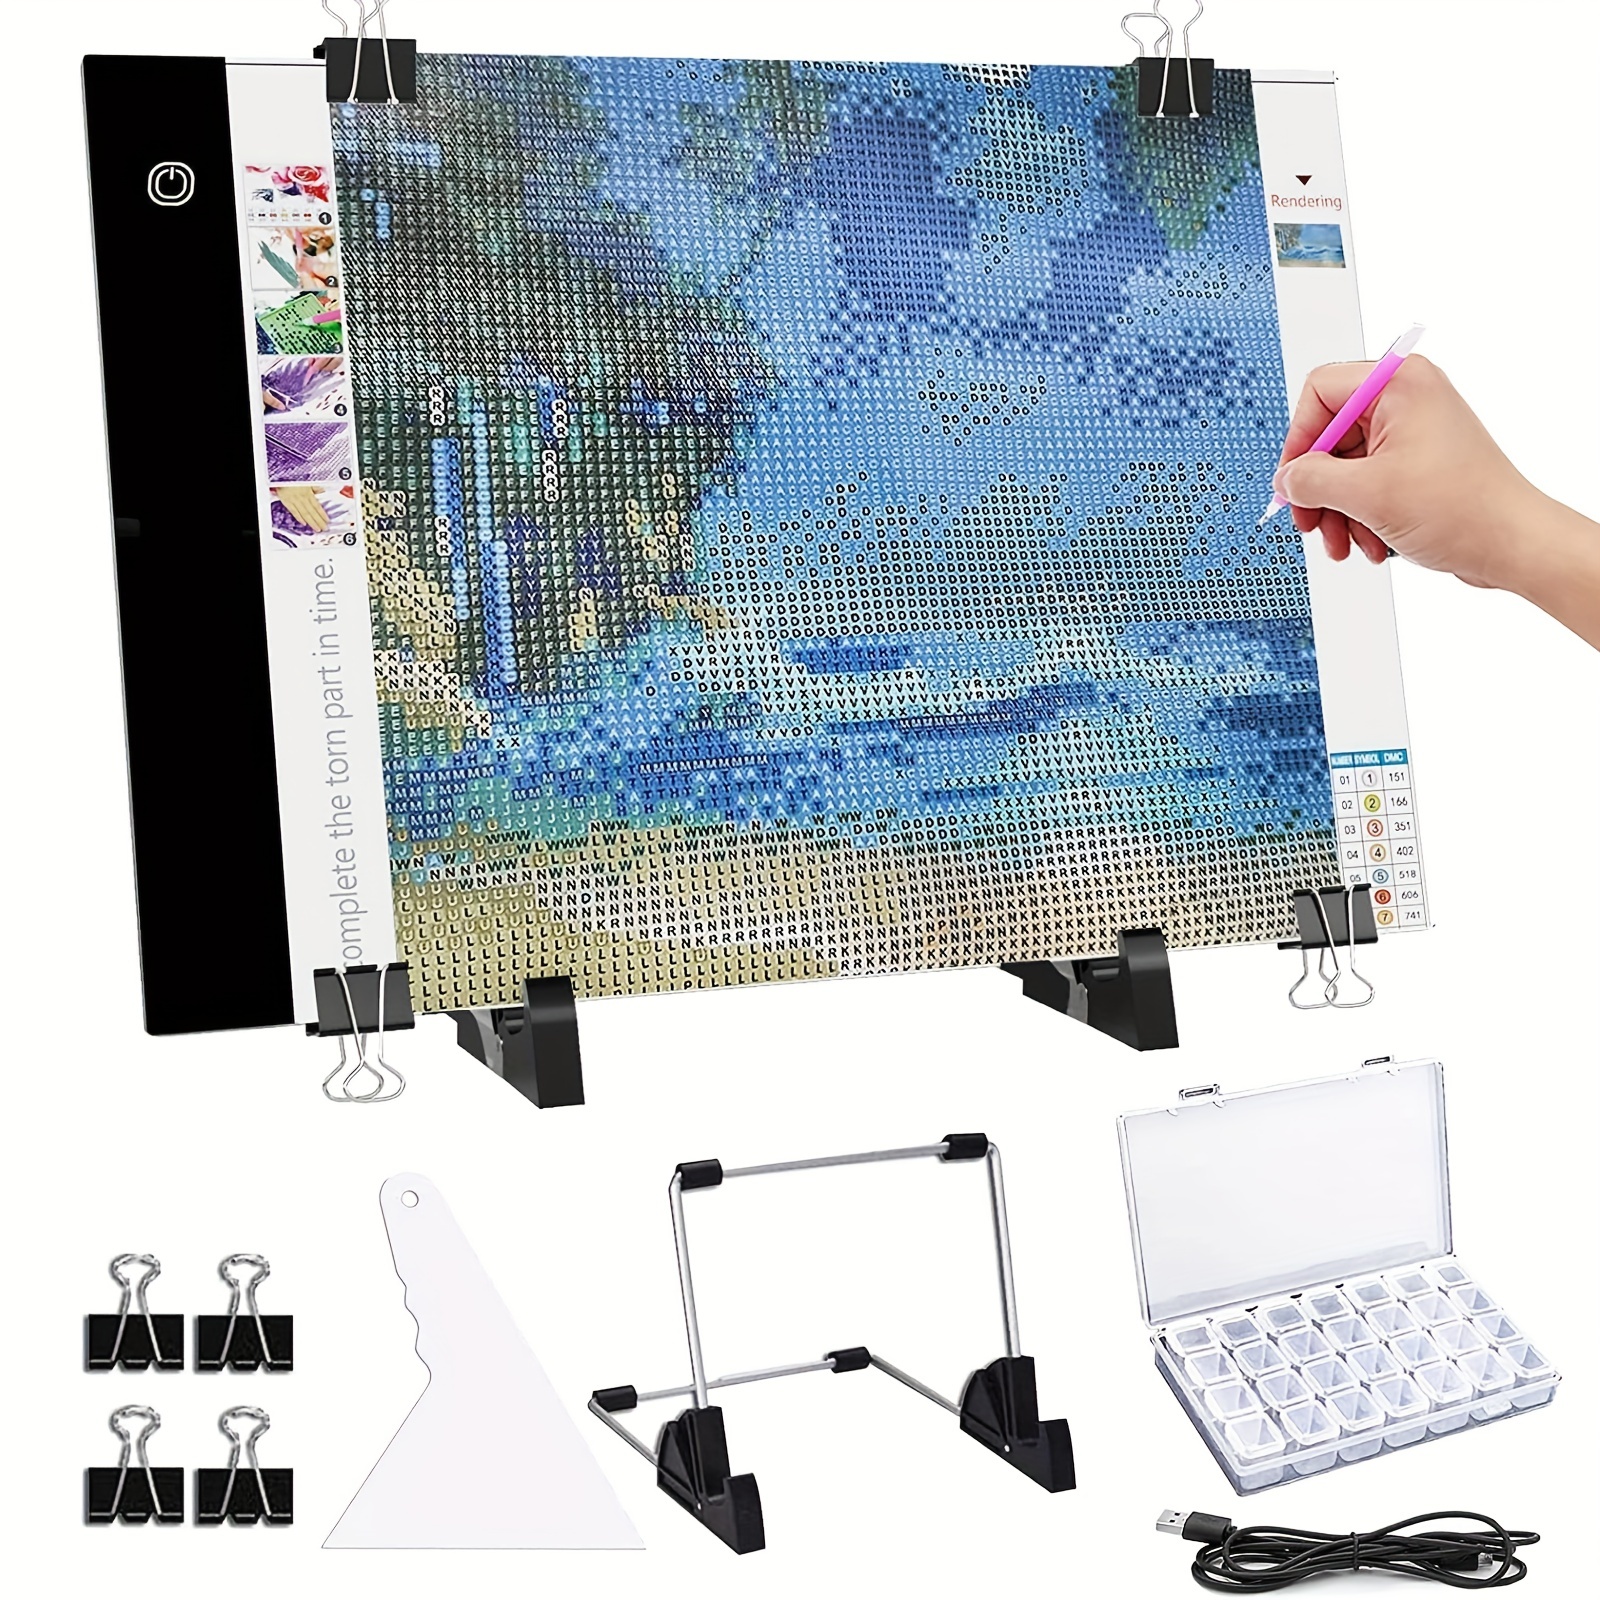 Foldable Stand for A4 Diamond Painting Light Pad Tablet Board Holder  Adjustable Reading Rack Cross Stitch Accessories - AliExpress